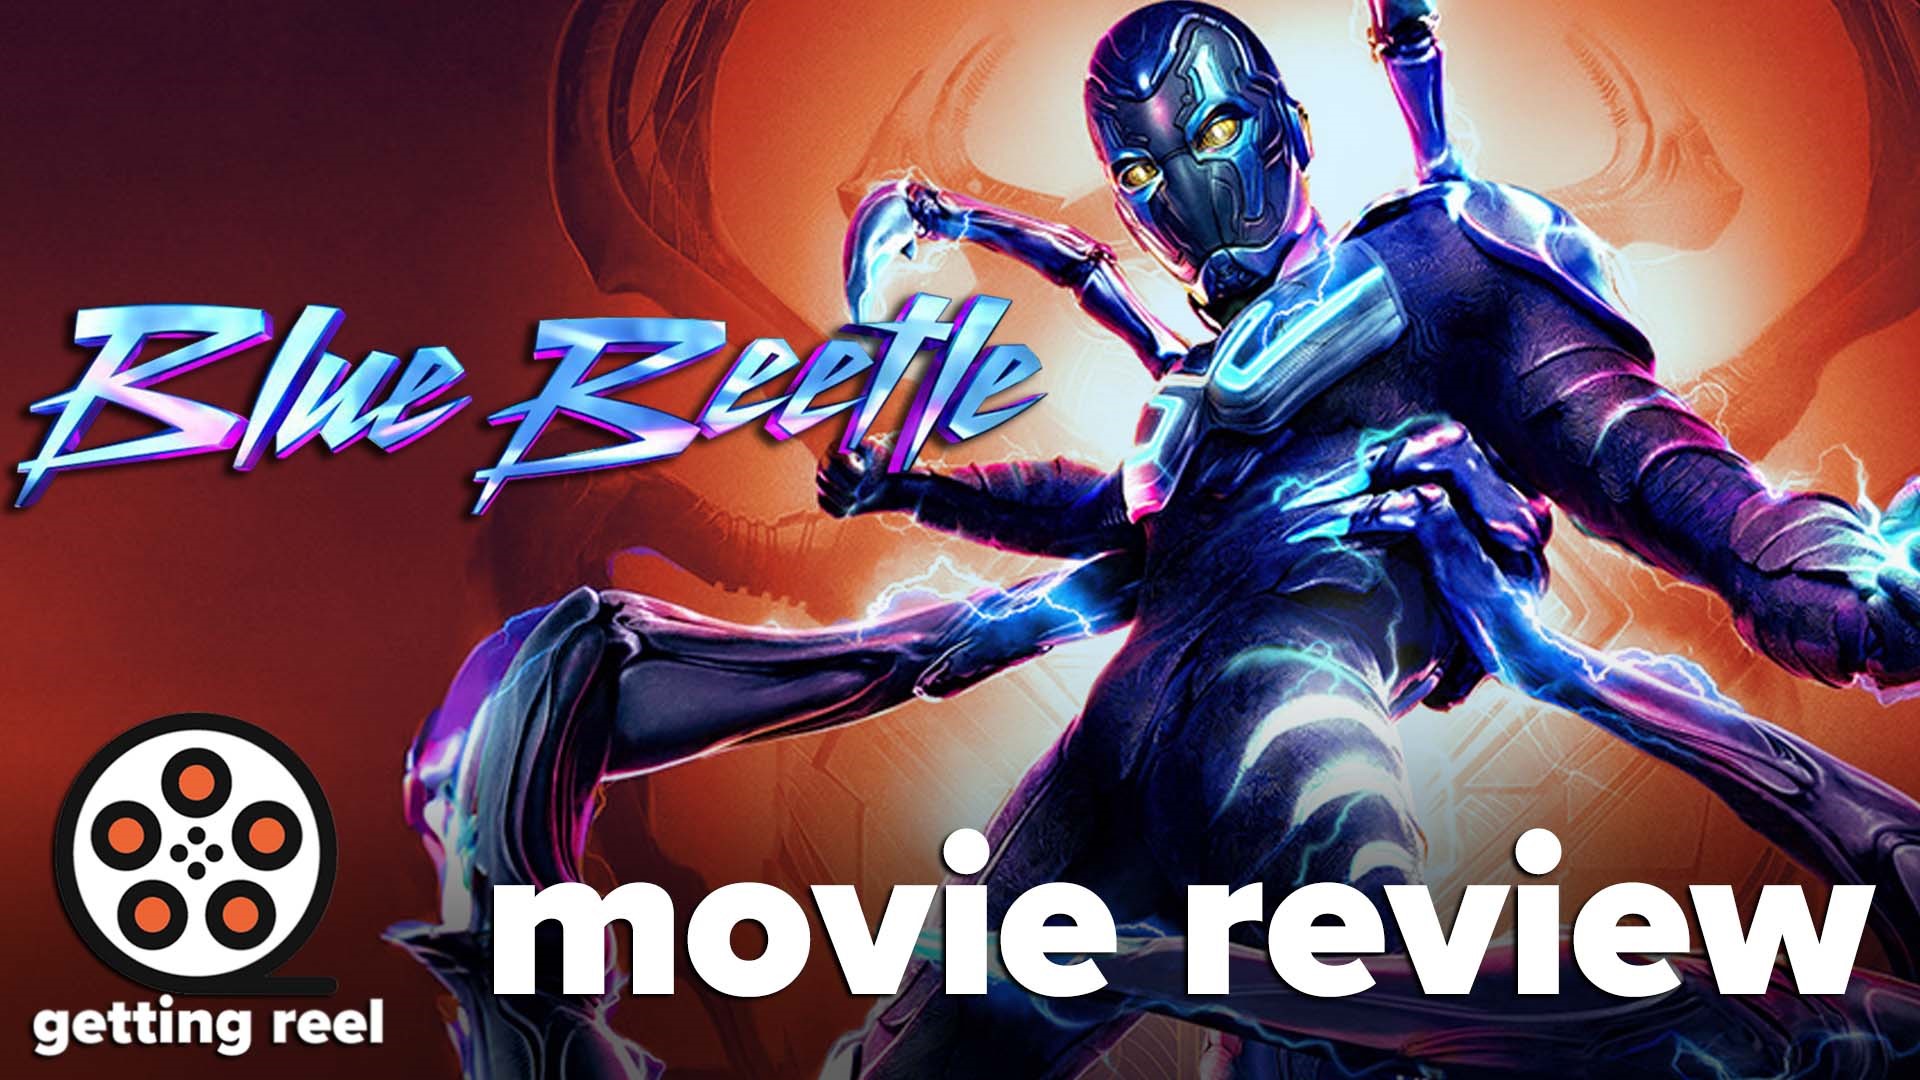 Blue Beetle marks the end of one DC cinematic universe with a fun, family-focused superhero movie.